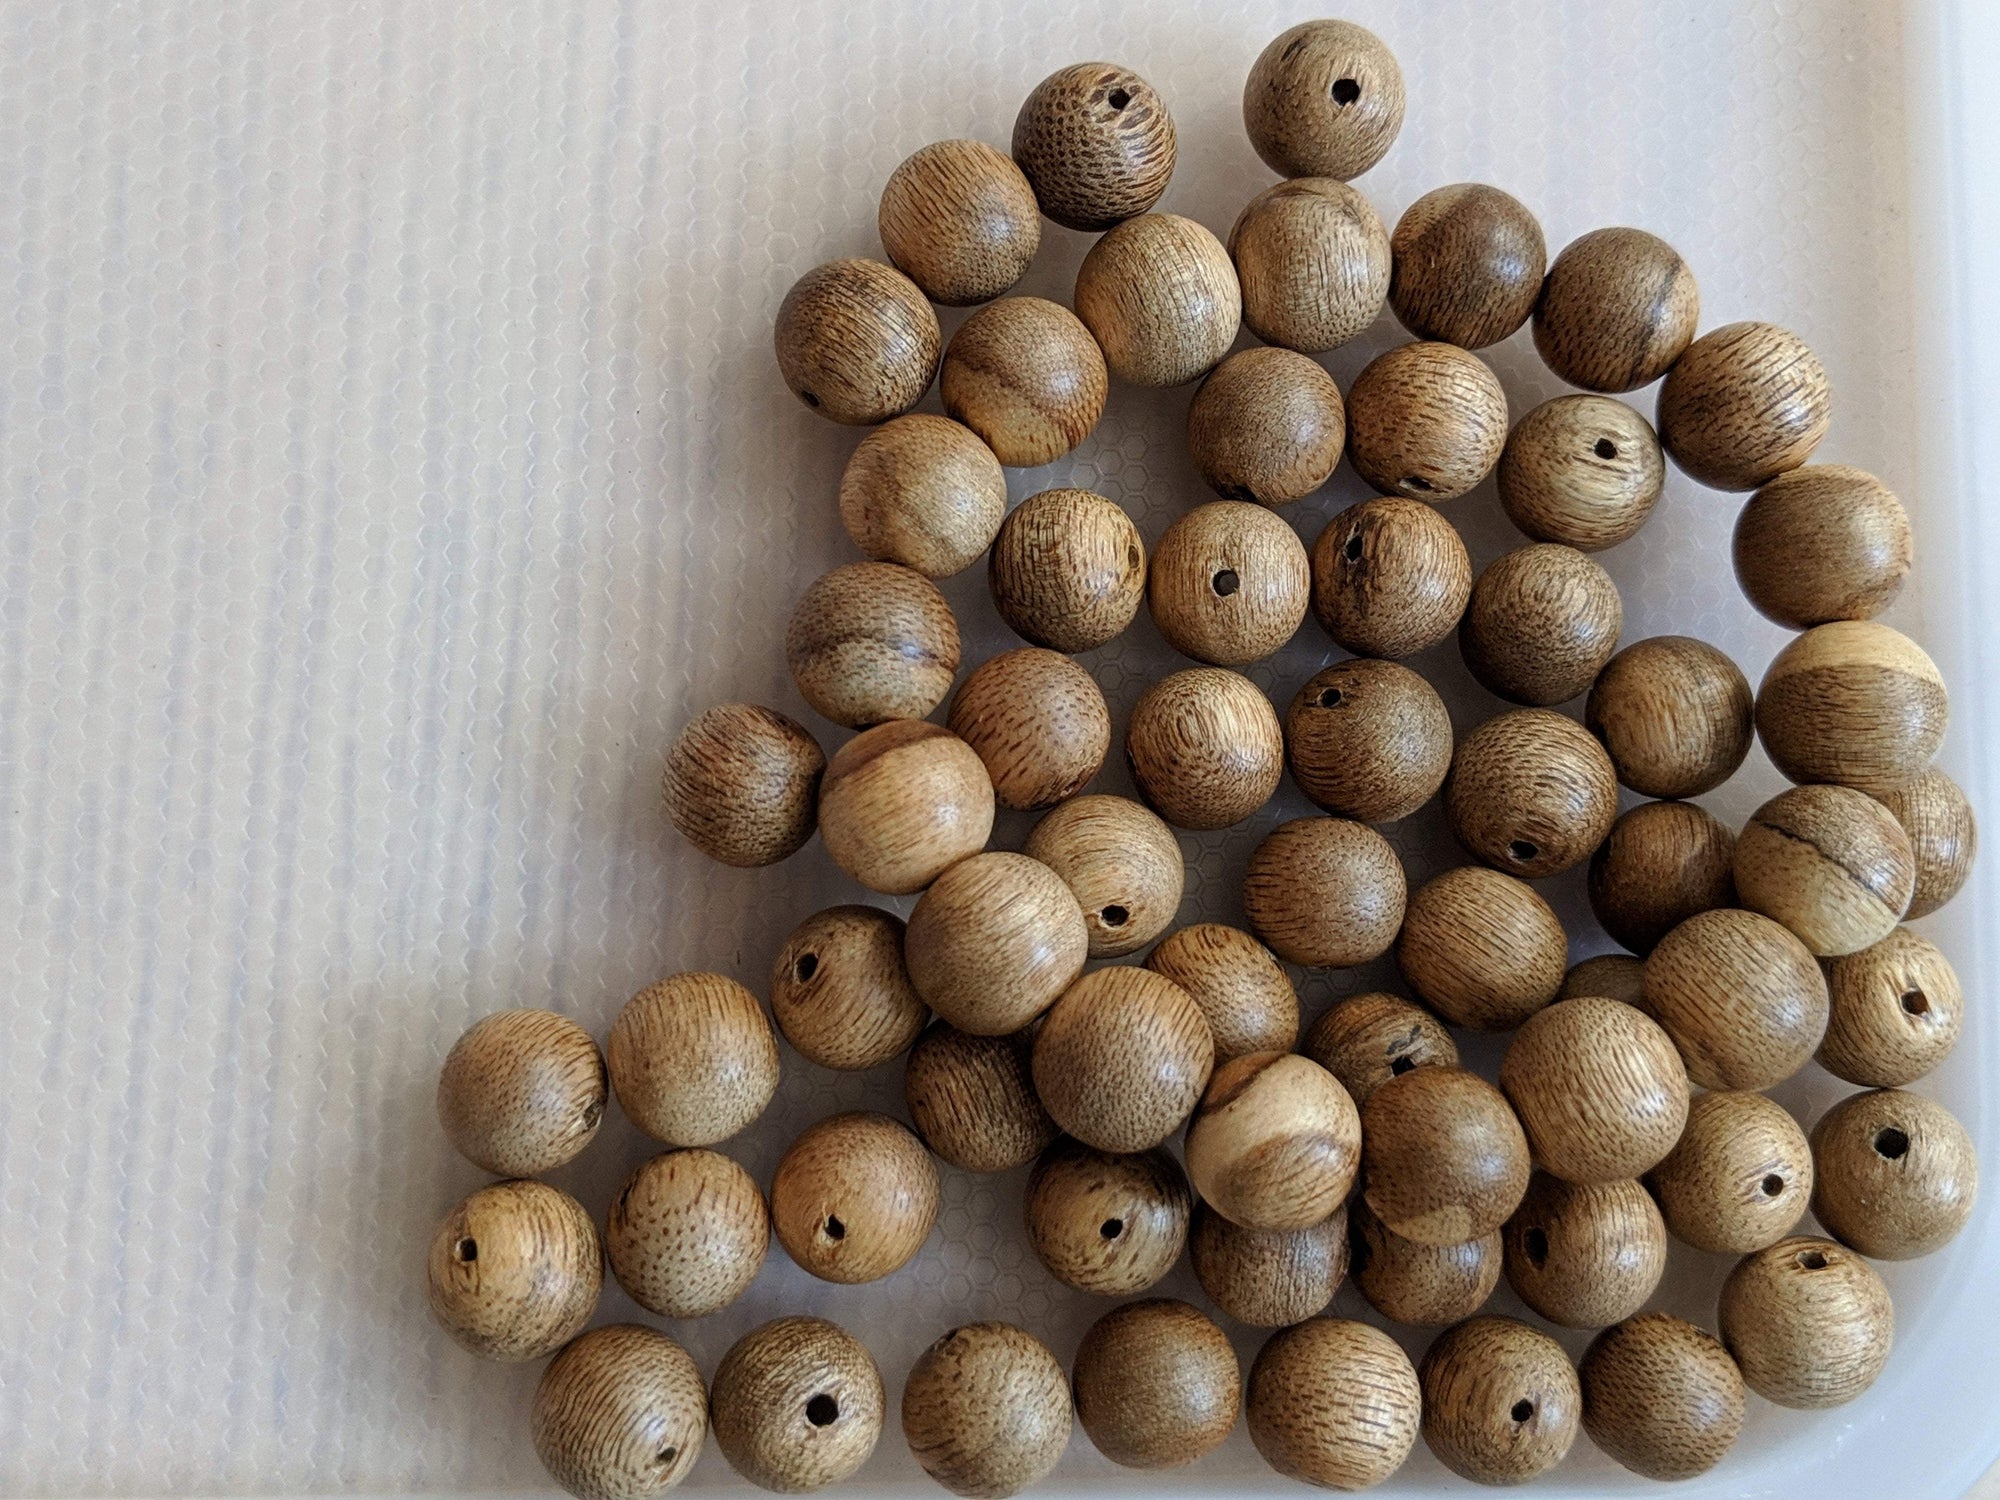 Single Cultivated Agarwood Beads dimension 11 mm suitable for DIY bracelet or necklace -